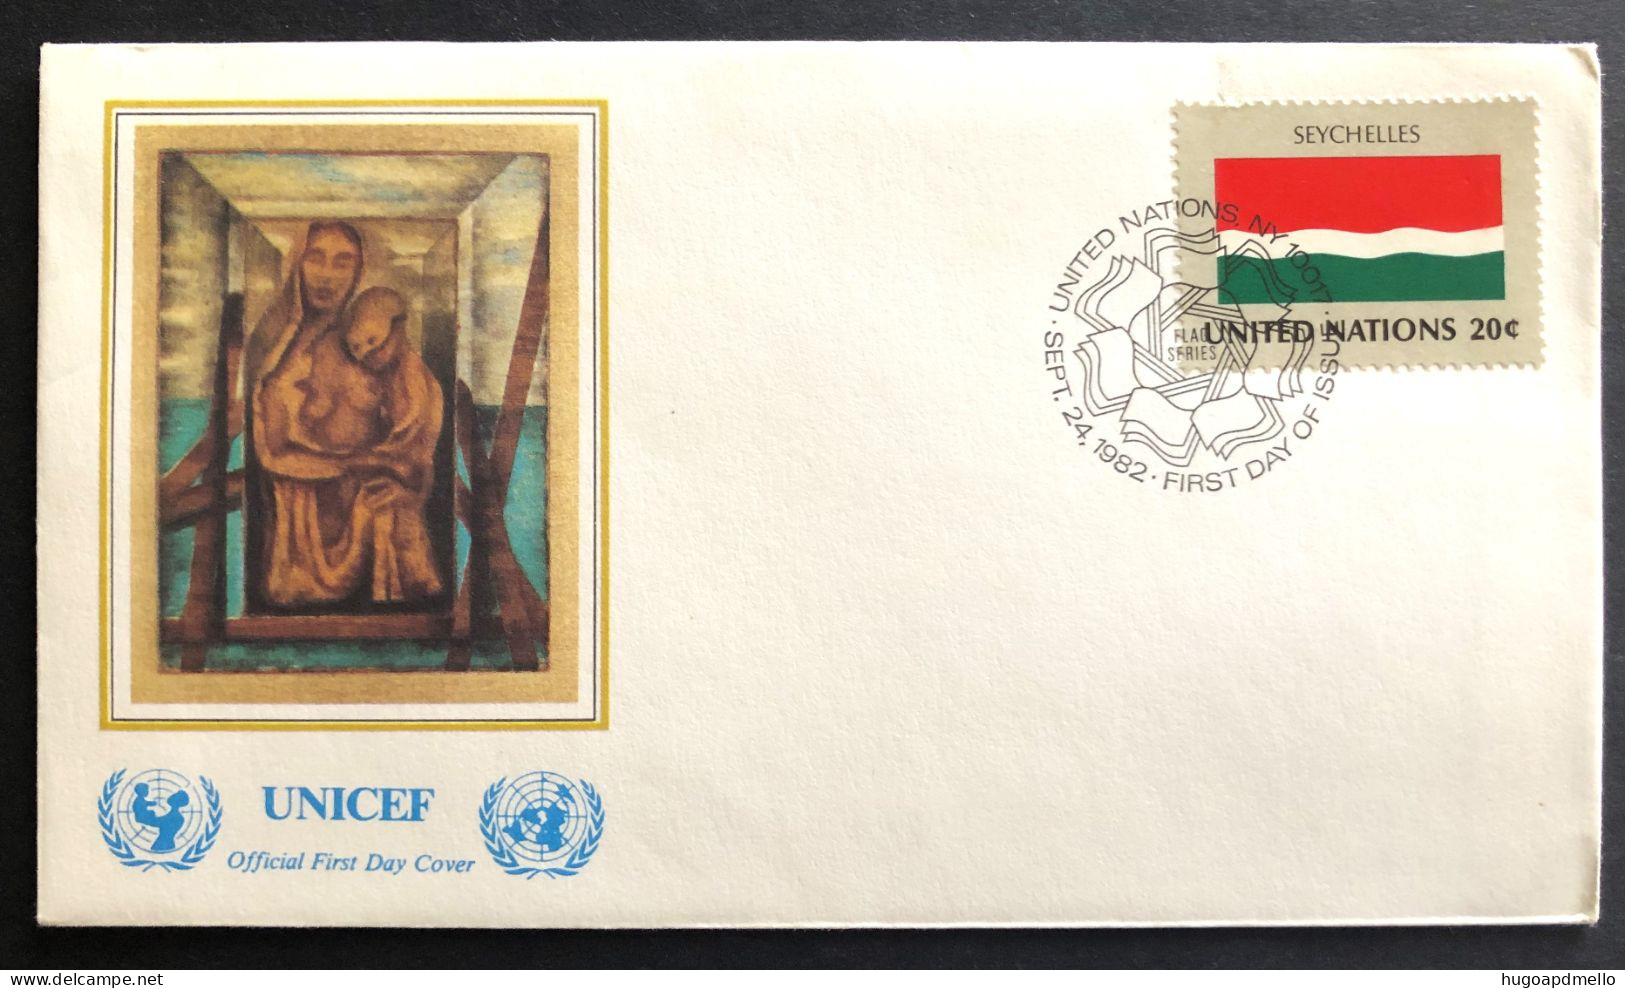 UNITED NATIONS,  FDC, UNICEF, « SEYCHELLES », Flags, Painting, 1982 - UNICEF